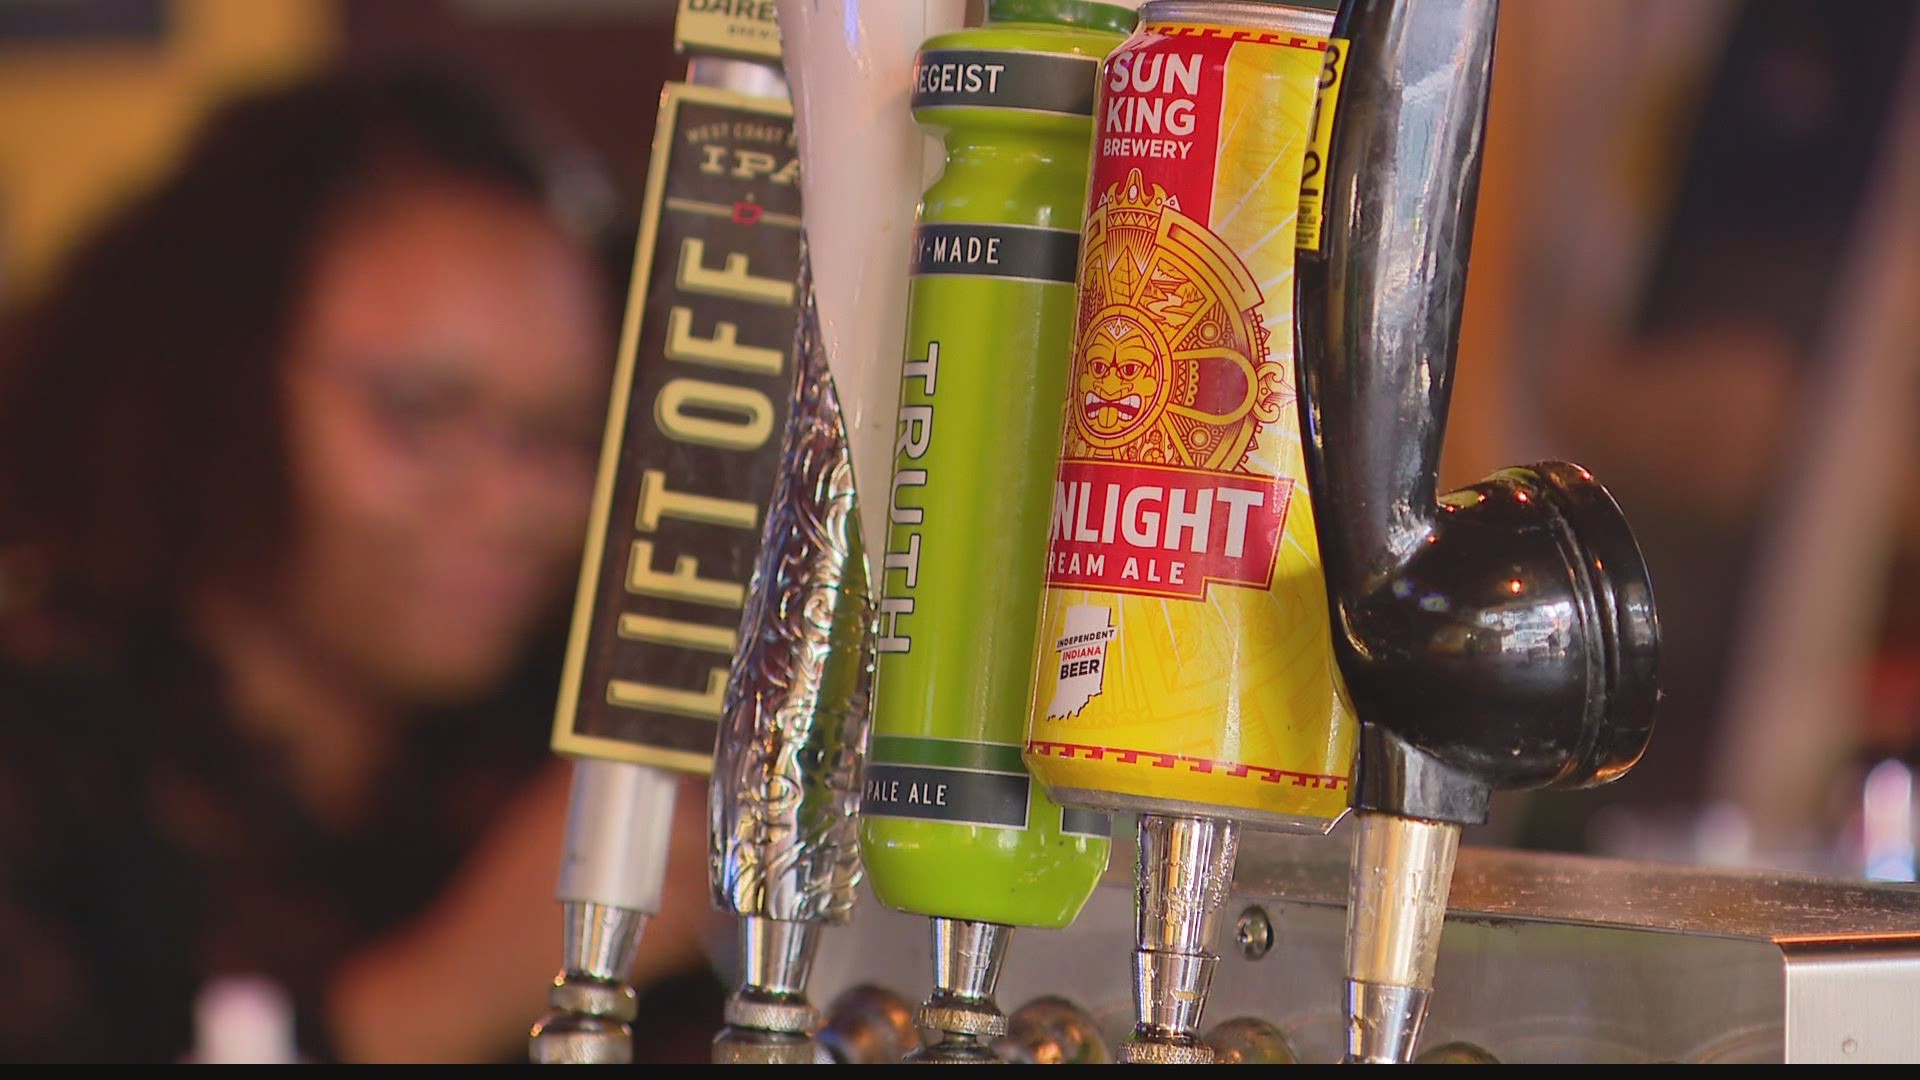 More than a dozen Indianapolis bars and nightclubs are suing the city of Indianapolis over COVID-19 restrictions.